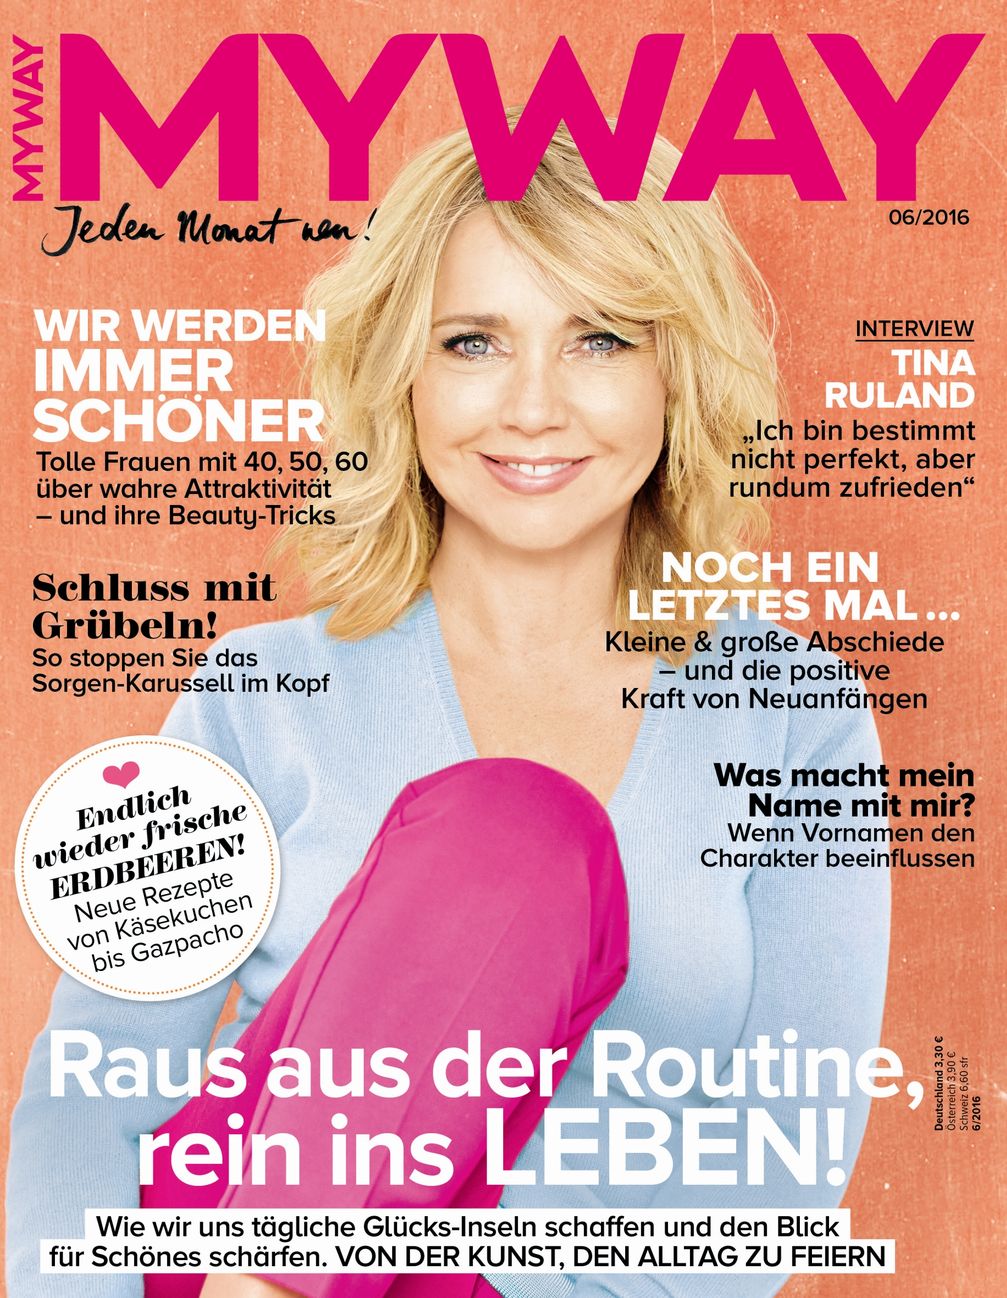 Bild: "obs/Bauer Media Group, MYWAY/MYWAY"